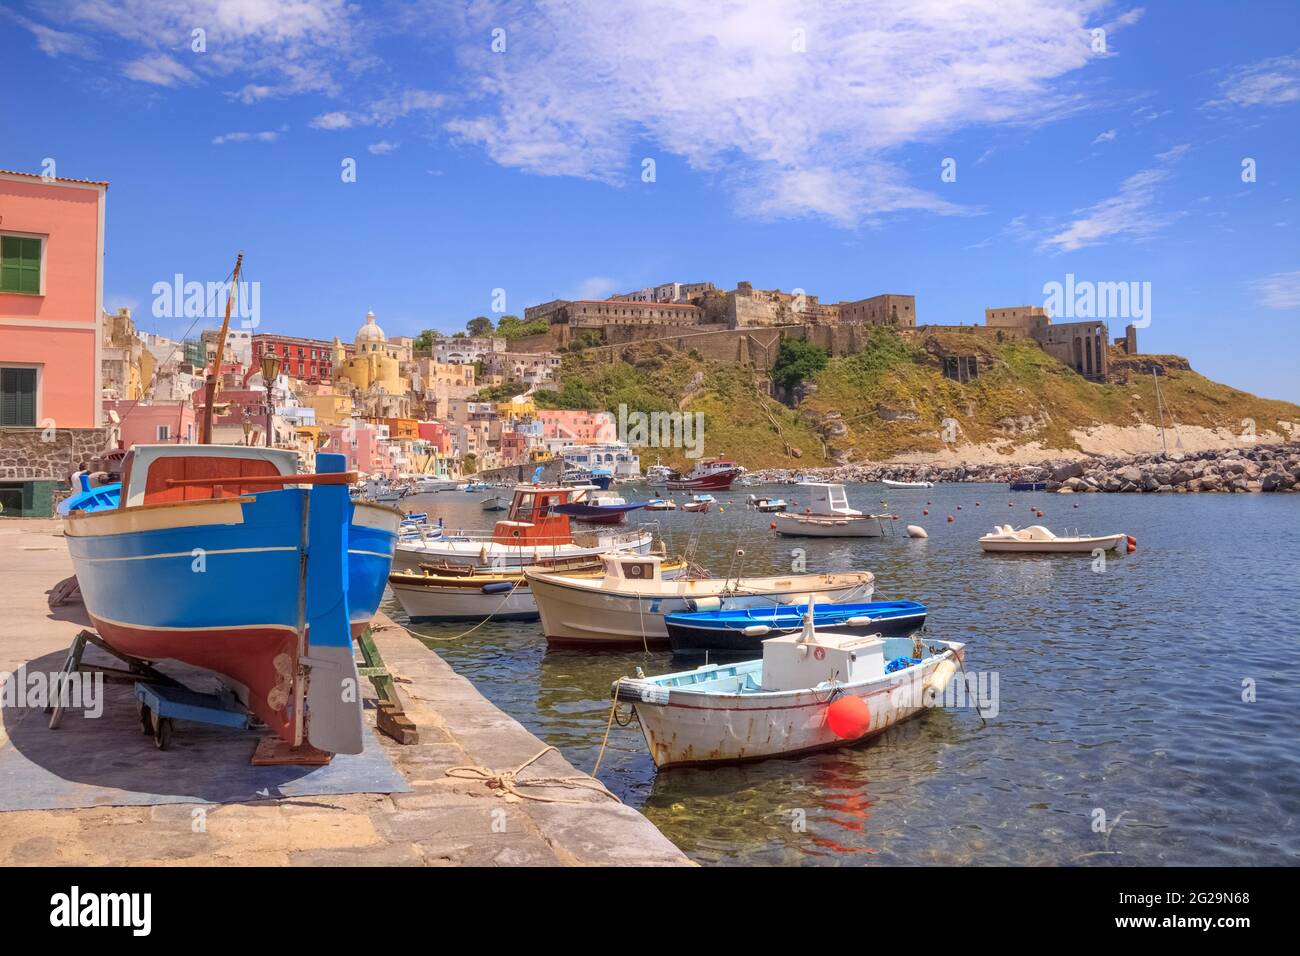 Panoramic view of Procida, Italian Capital of Culture 2022: colorful houses, cafes and restaurants, fishing boats and yachts in Marina Corricella. Stock Photo